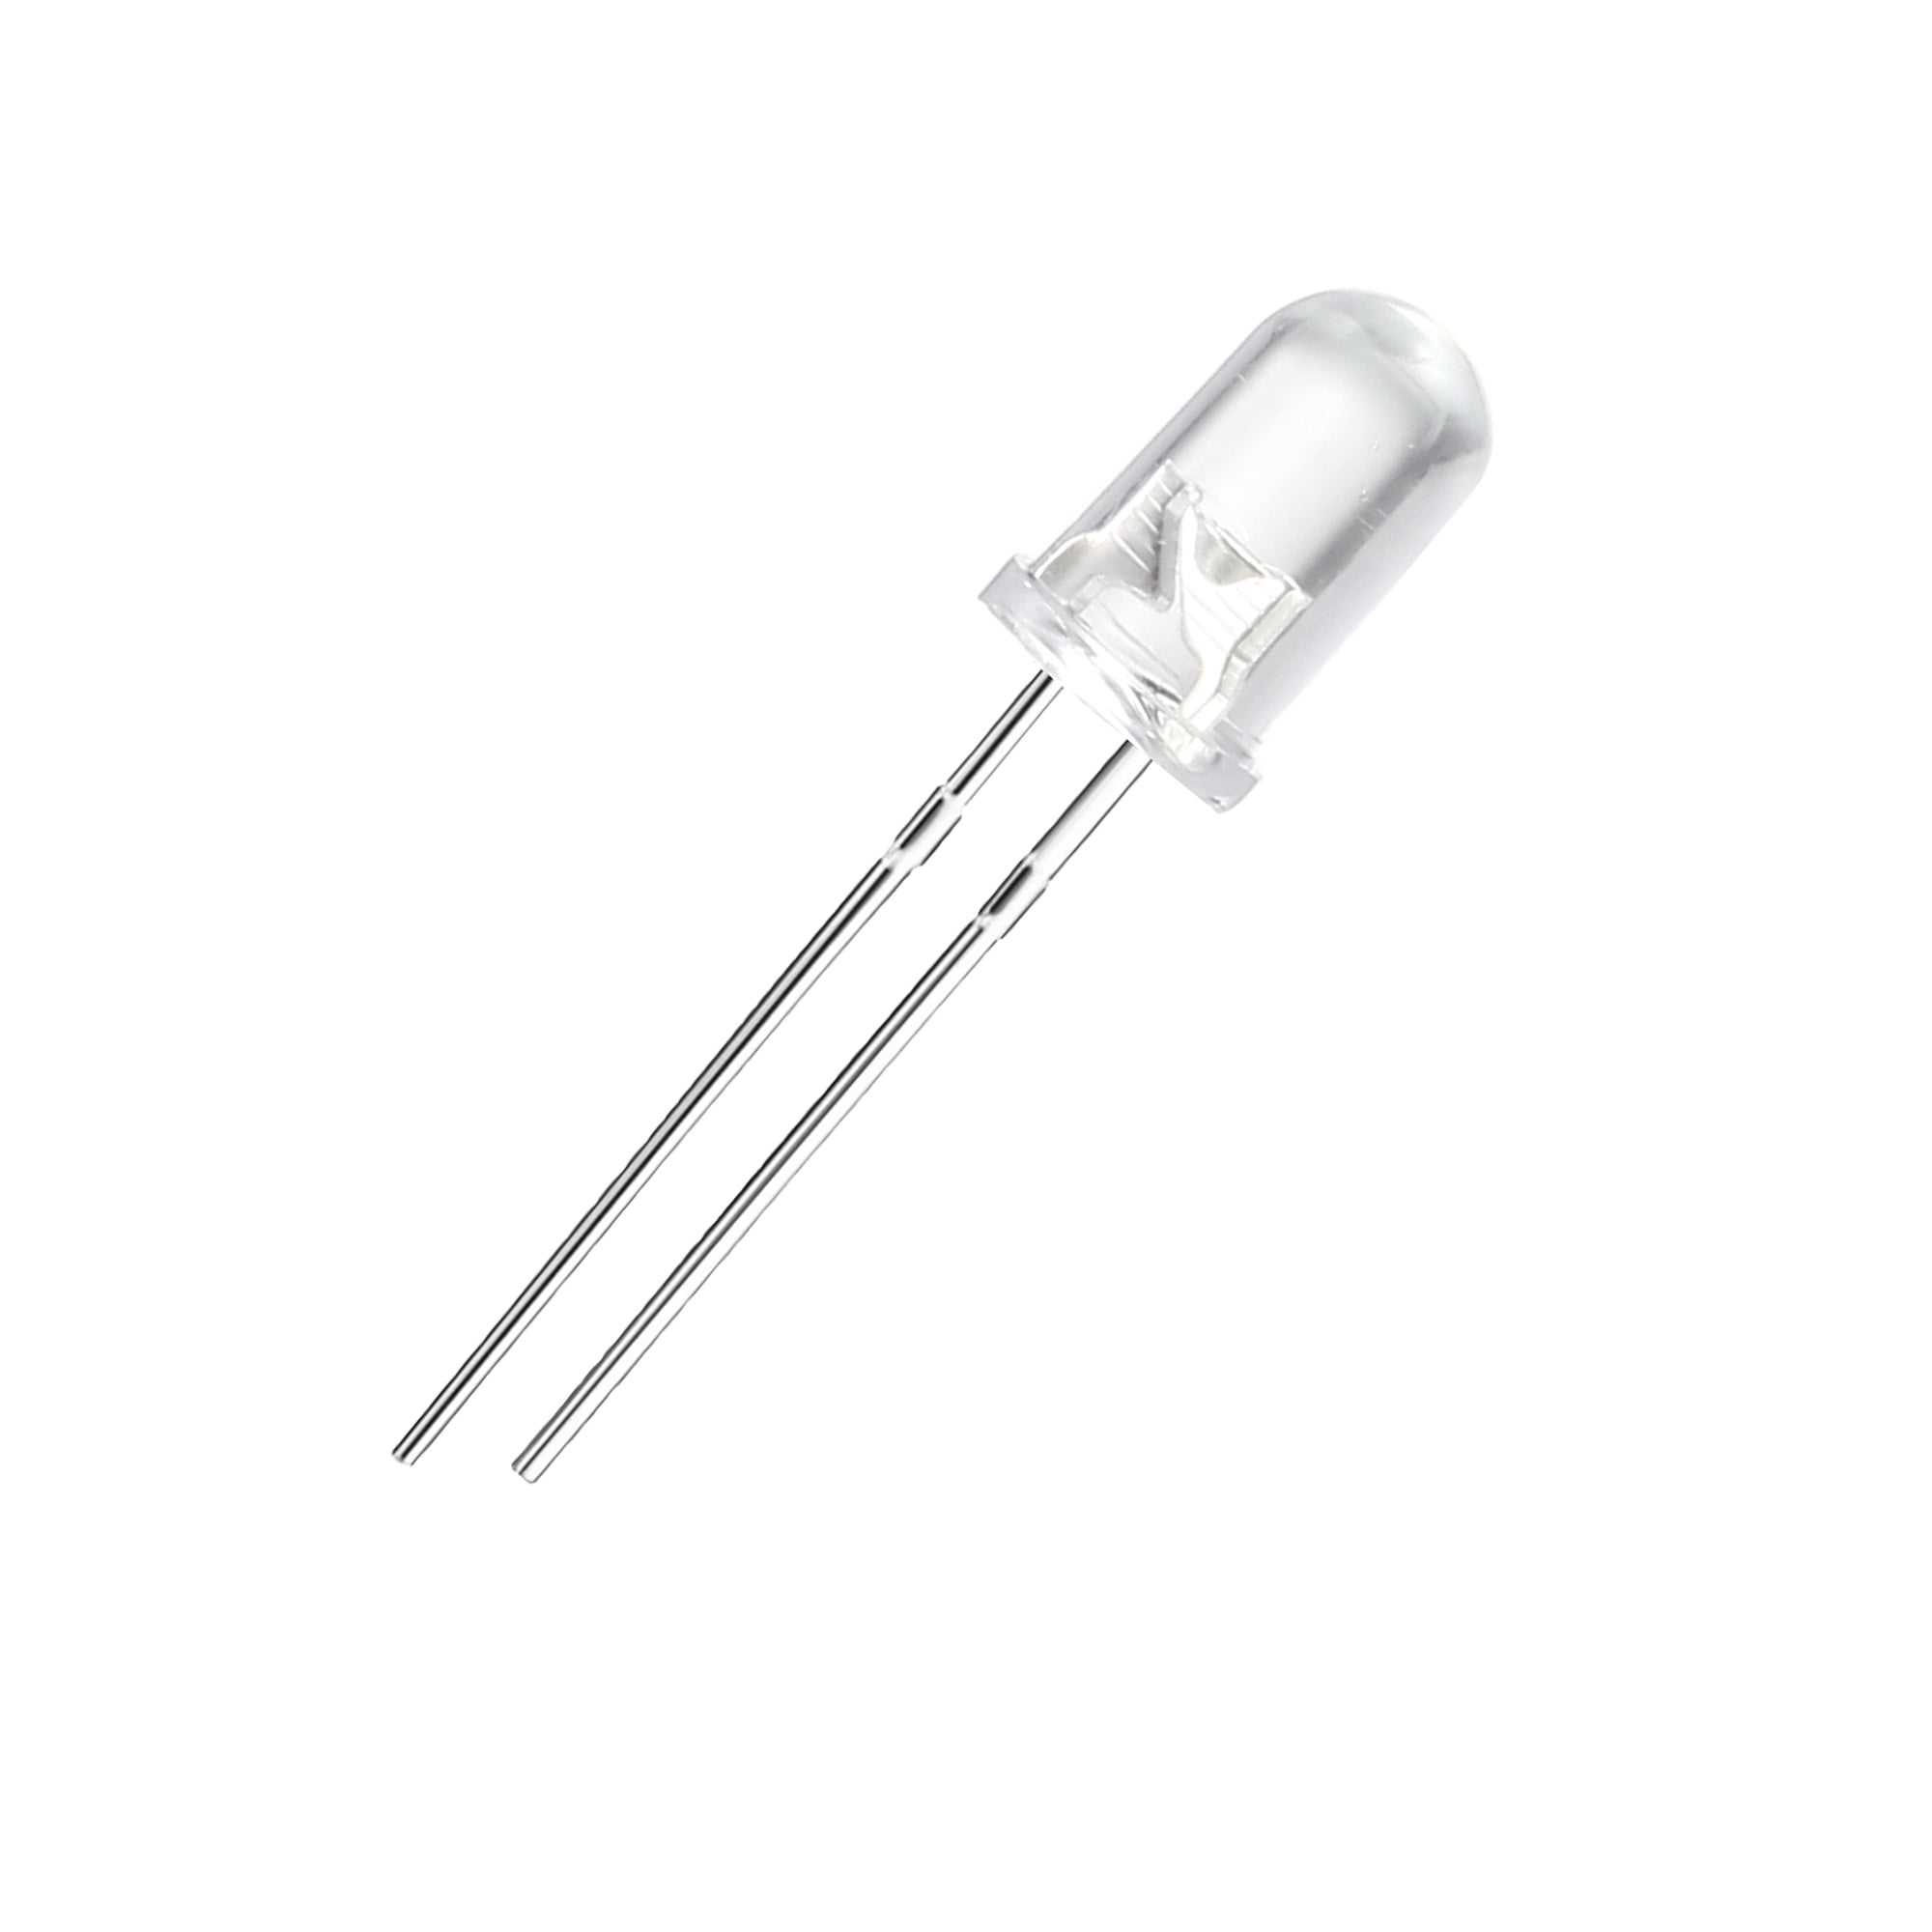 10x 3mm Ultra Bright Clear LED Diode 3.4v Green Light Emitting Diode 25° 